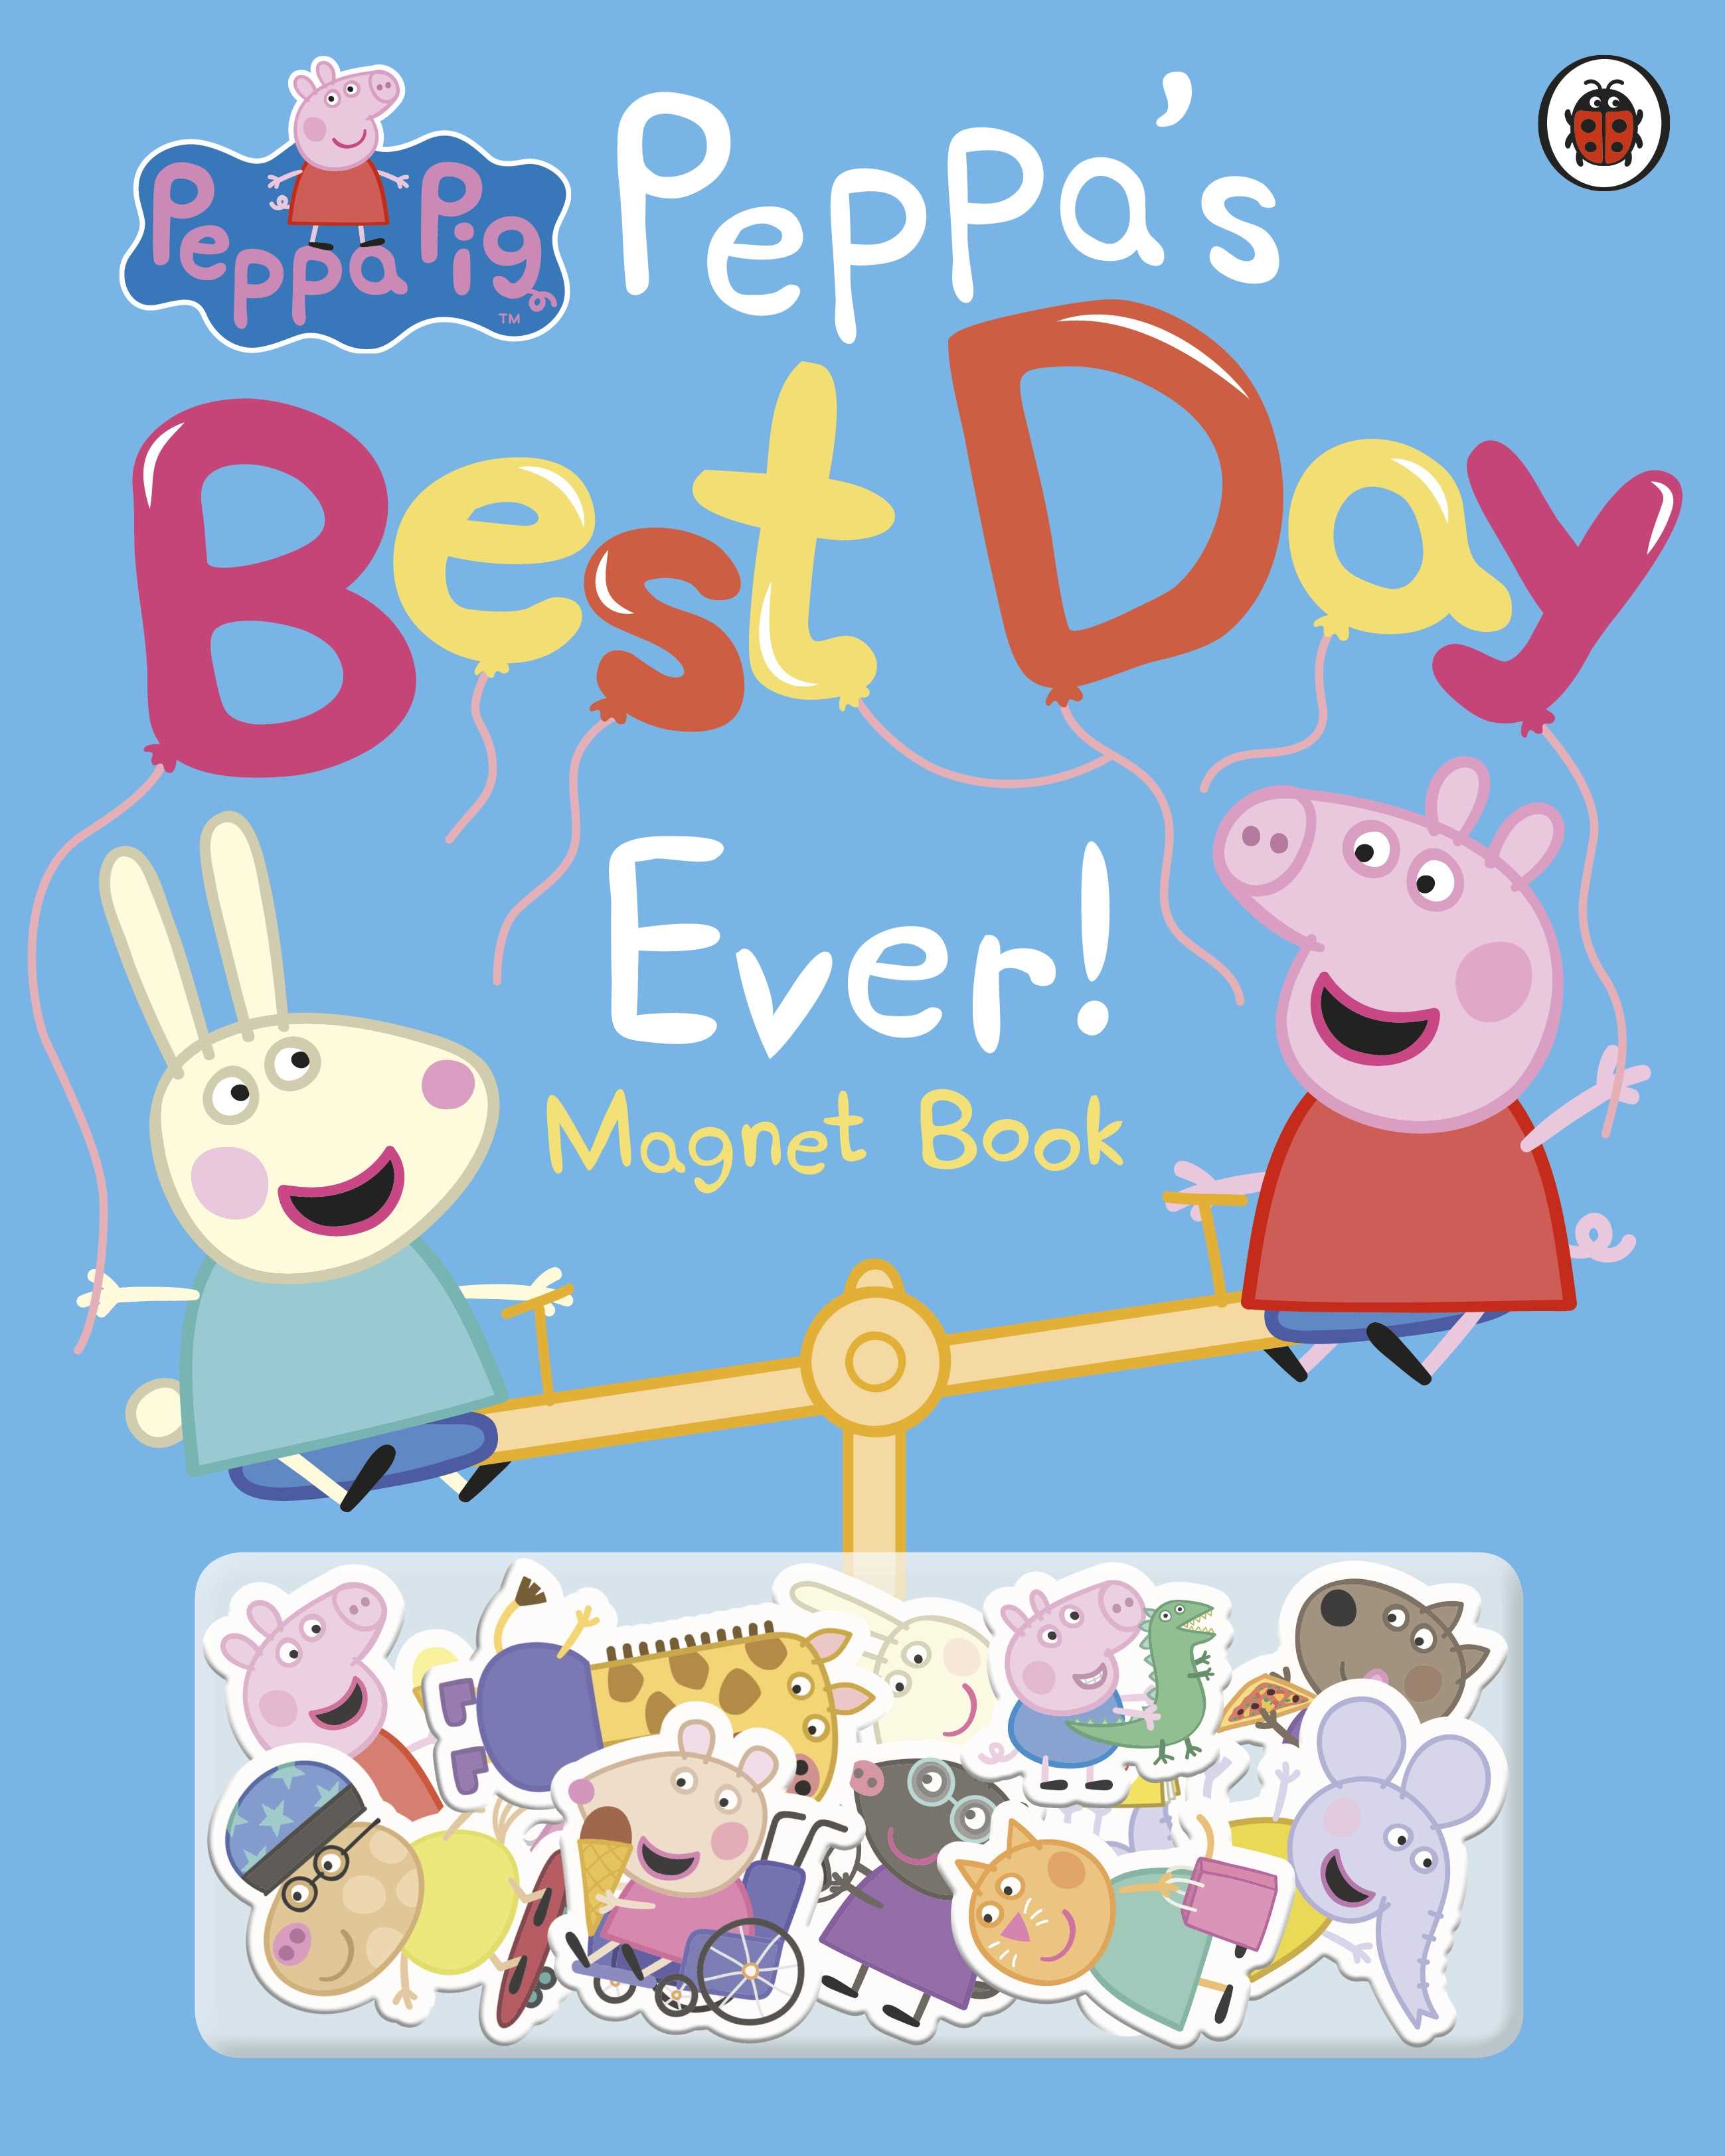 Peppa’s Best Day Ever